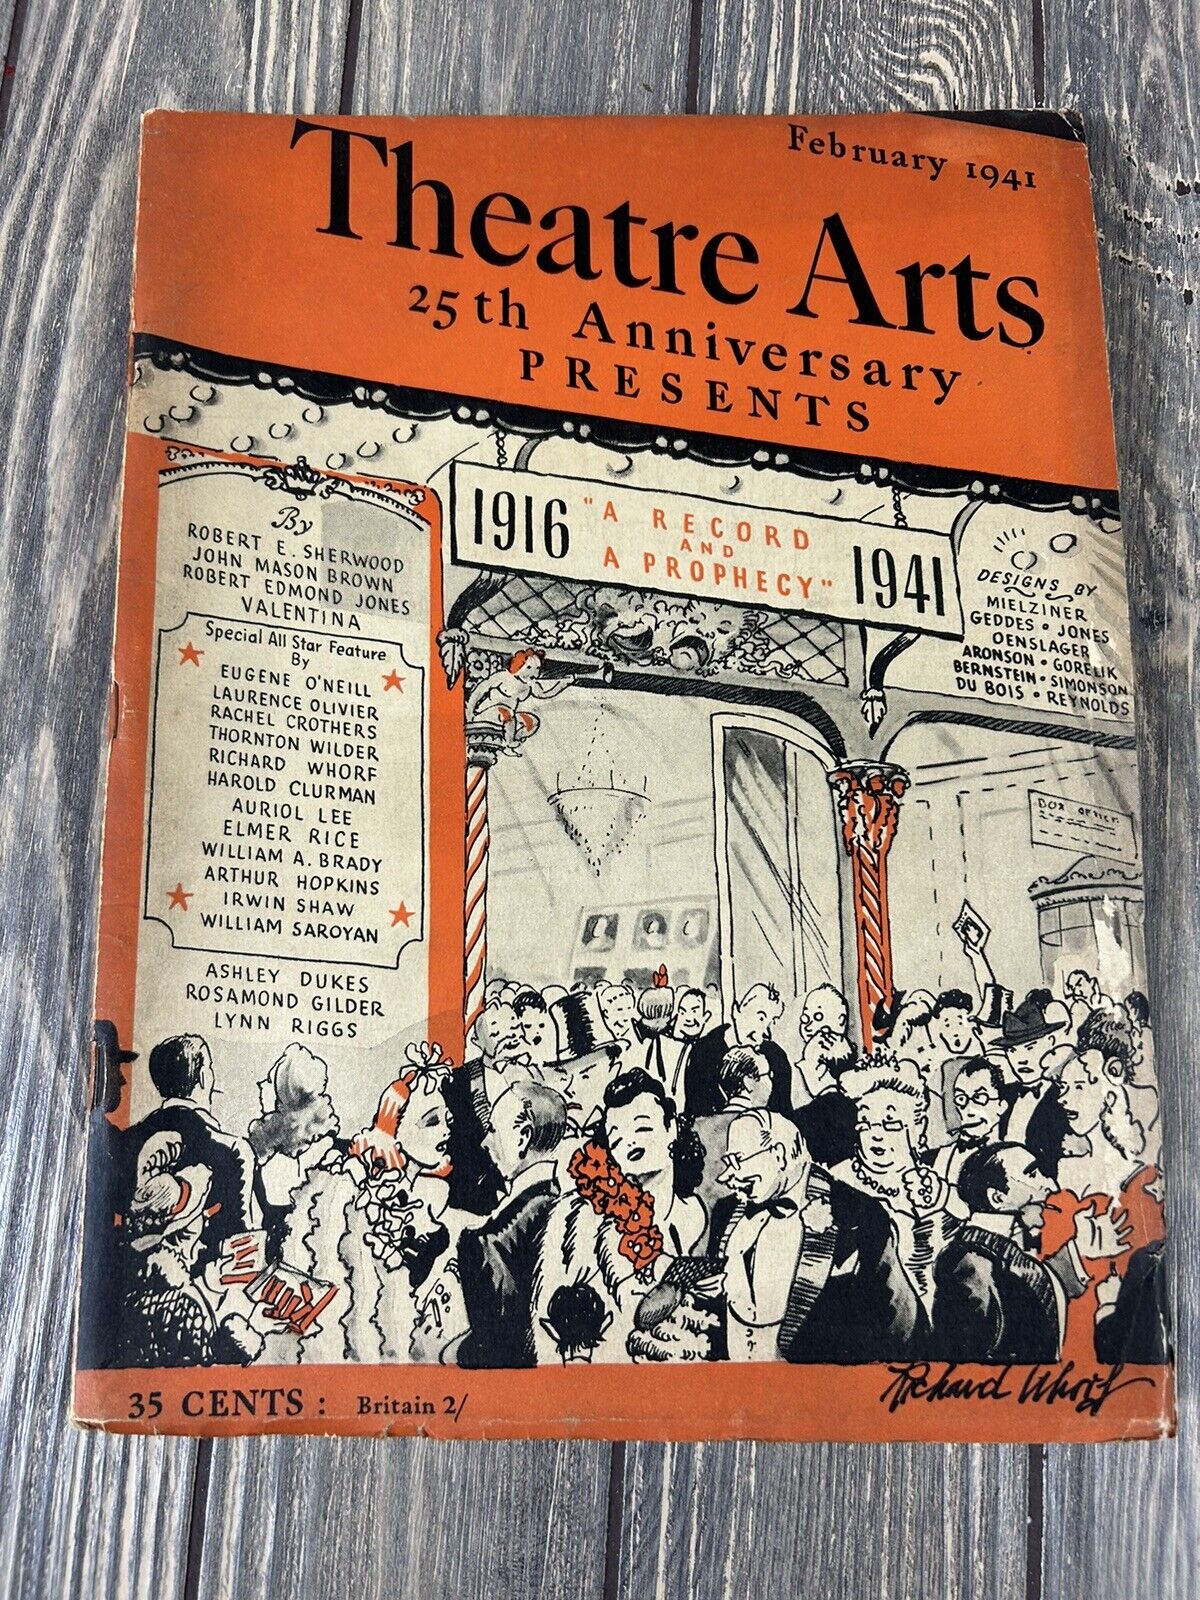 Vintage 1941 February Theatre Arts 25th Anniversary Presents A Record and A 